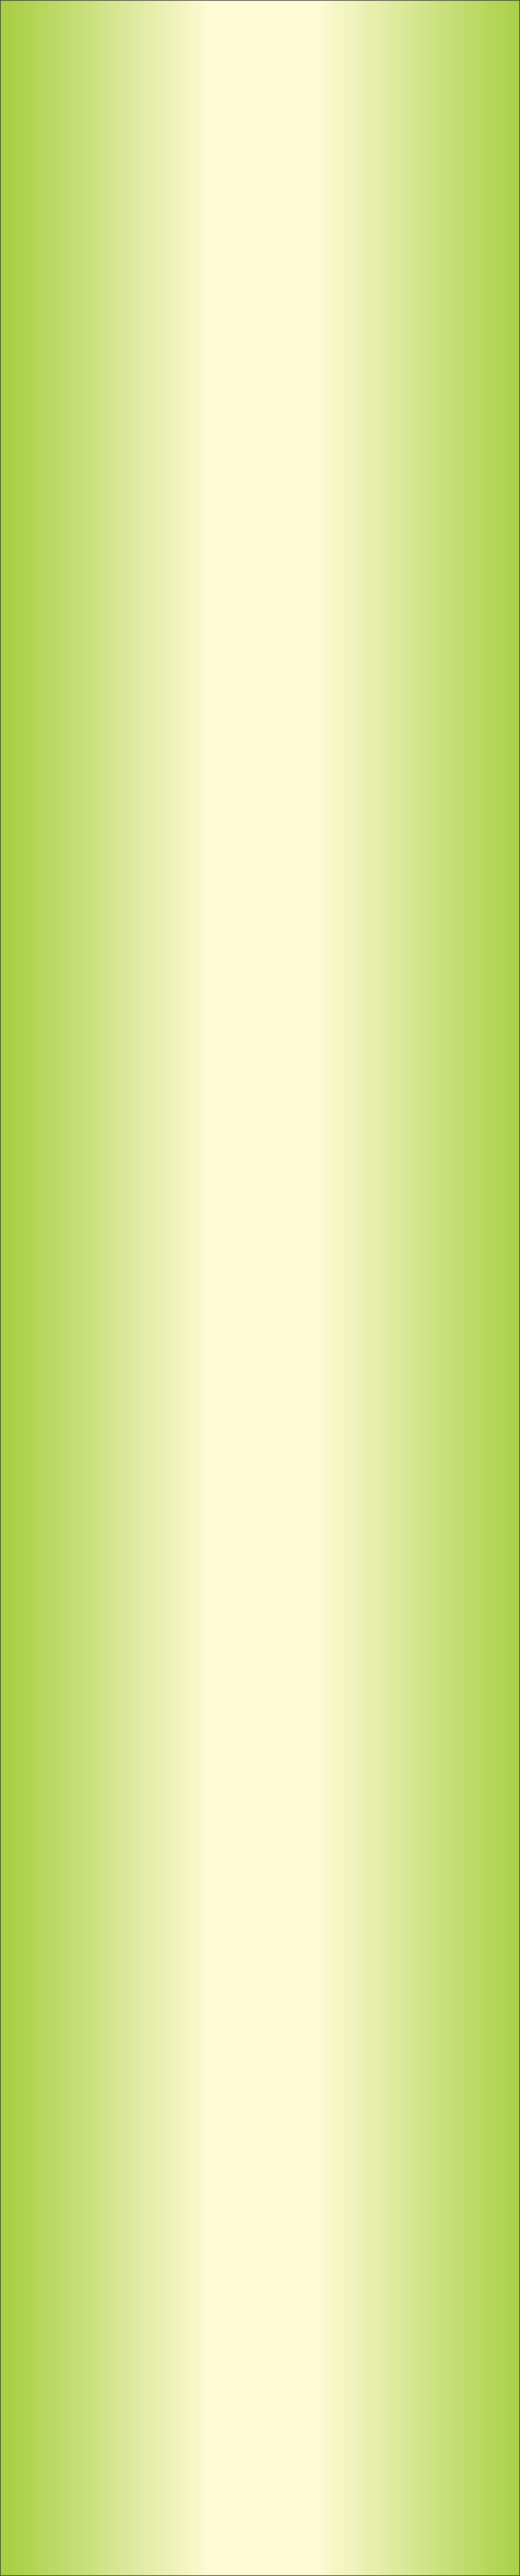 background-chartruse sides blending to a pale yellow center